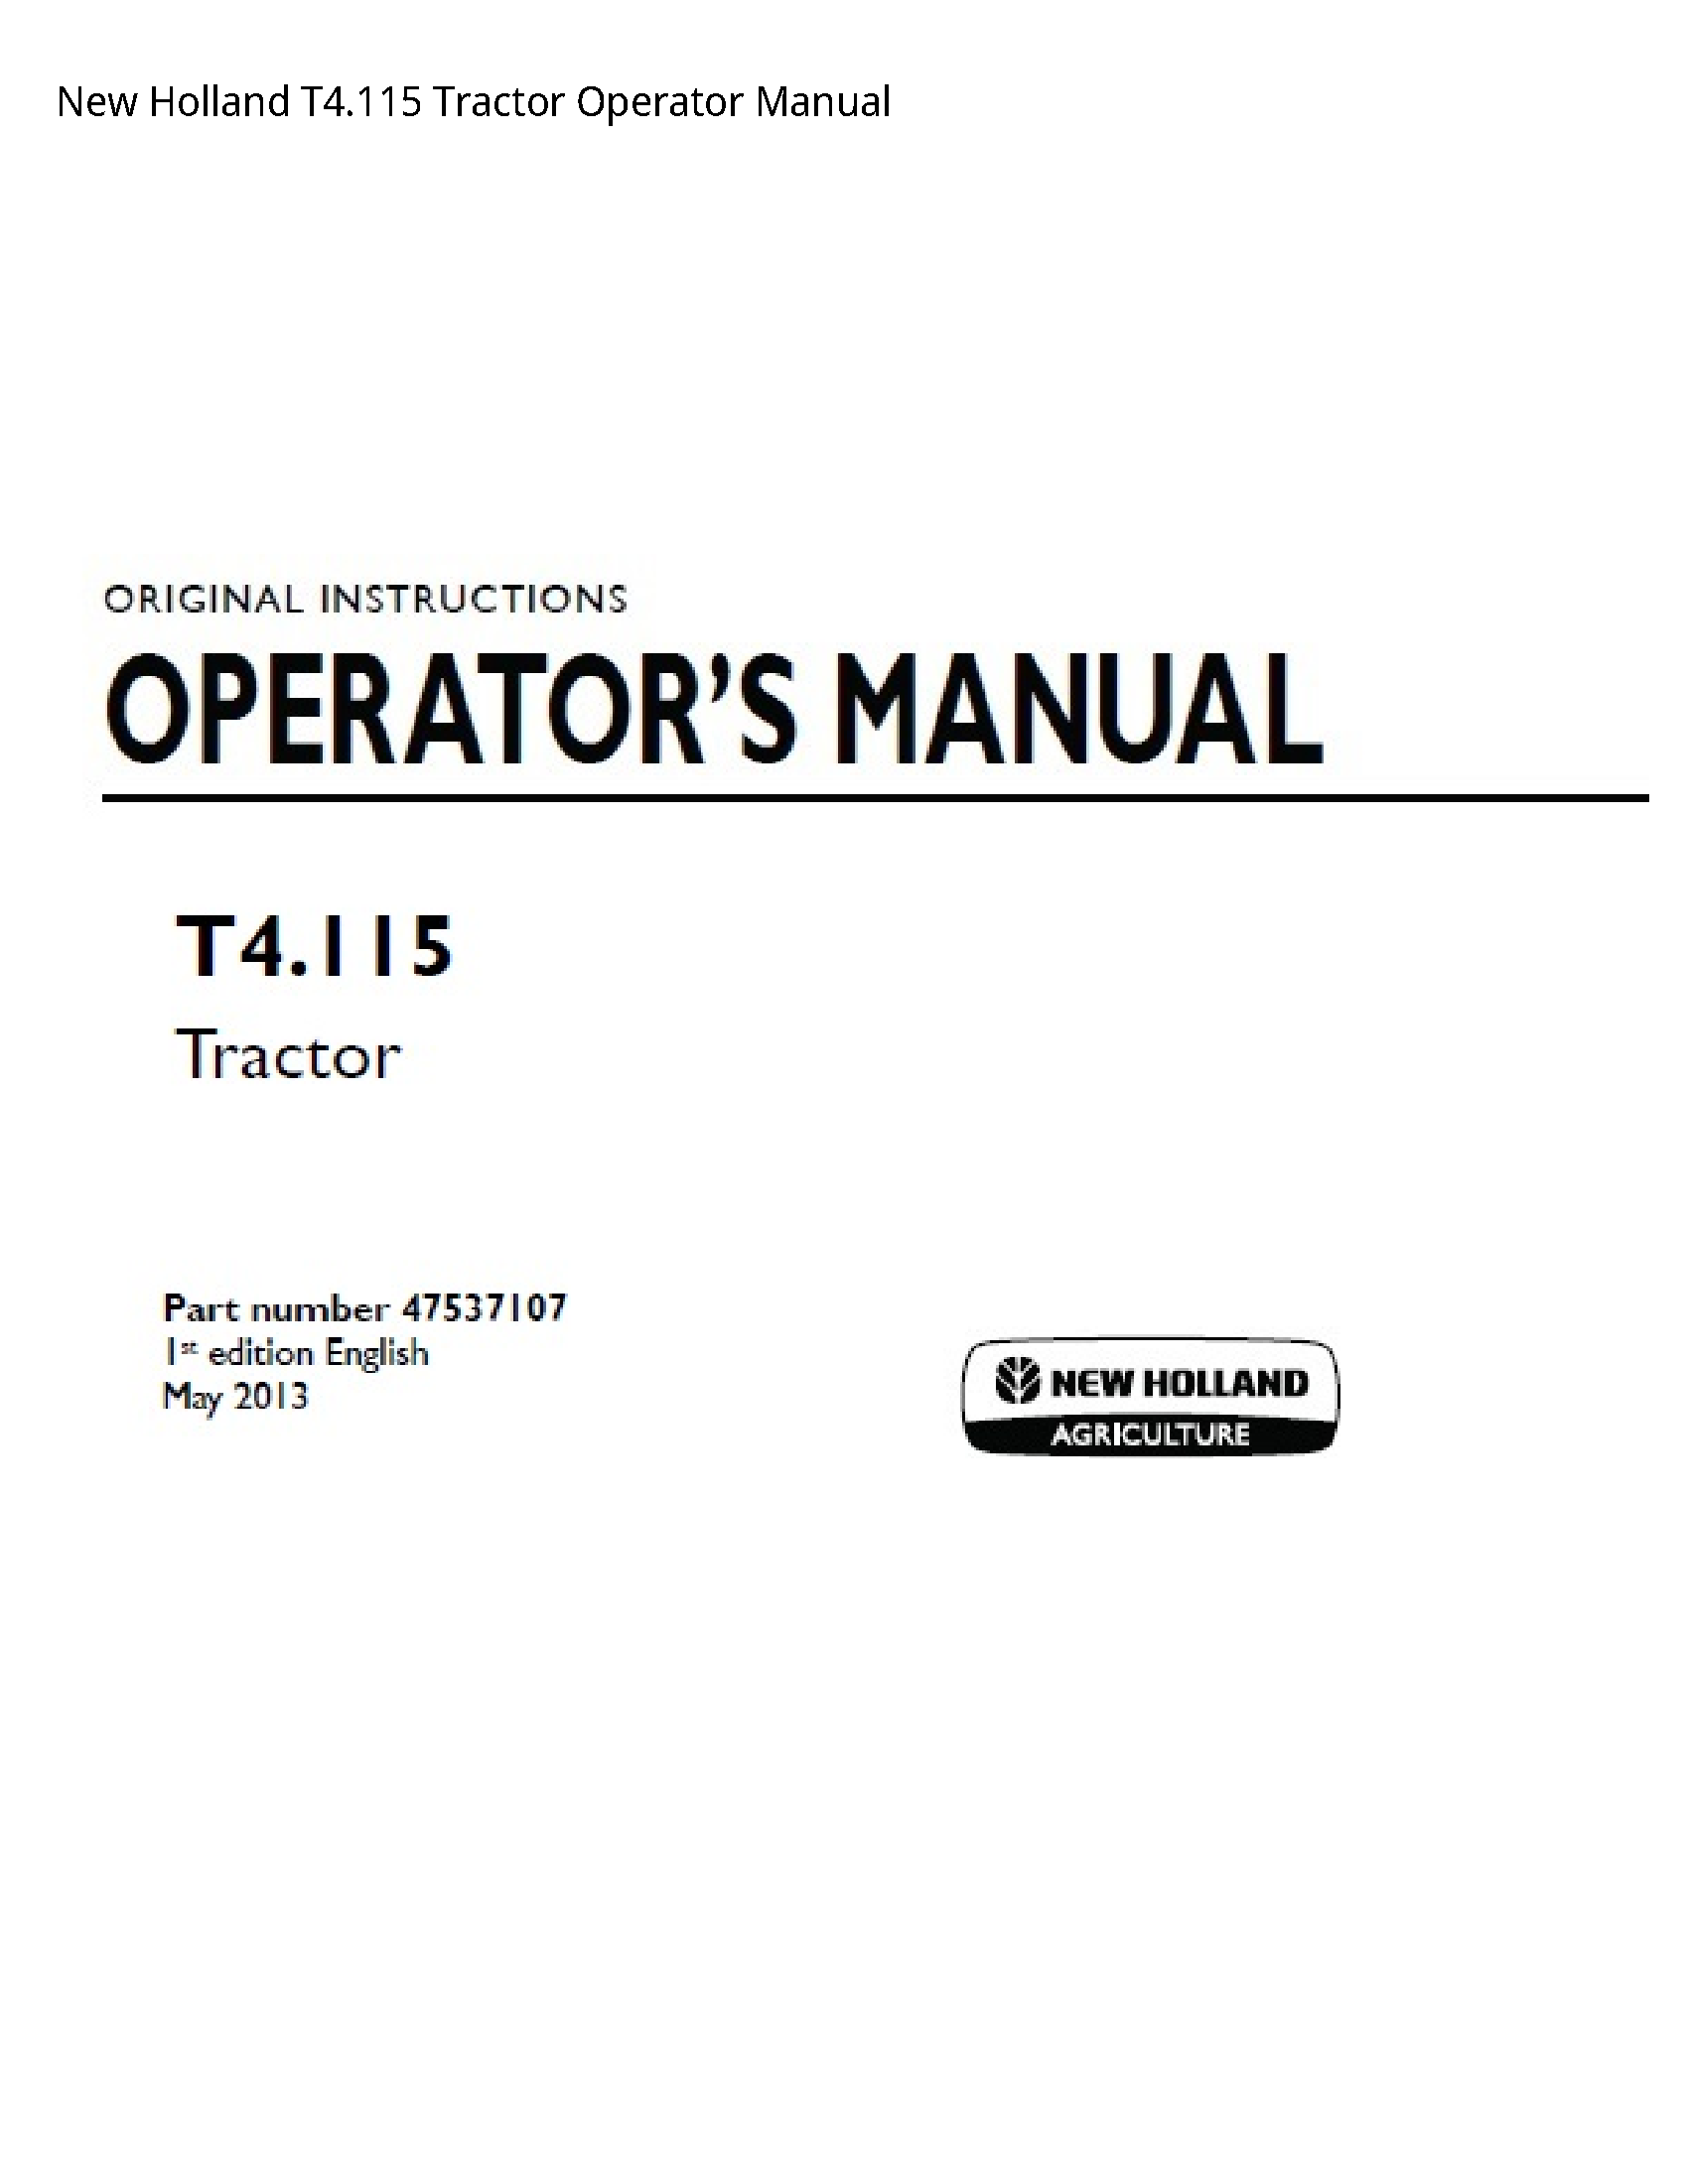 New Holland T4.115 Tractor Operator manual